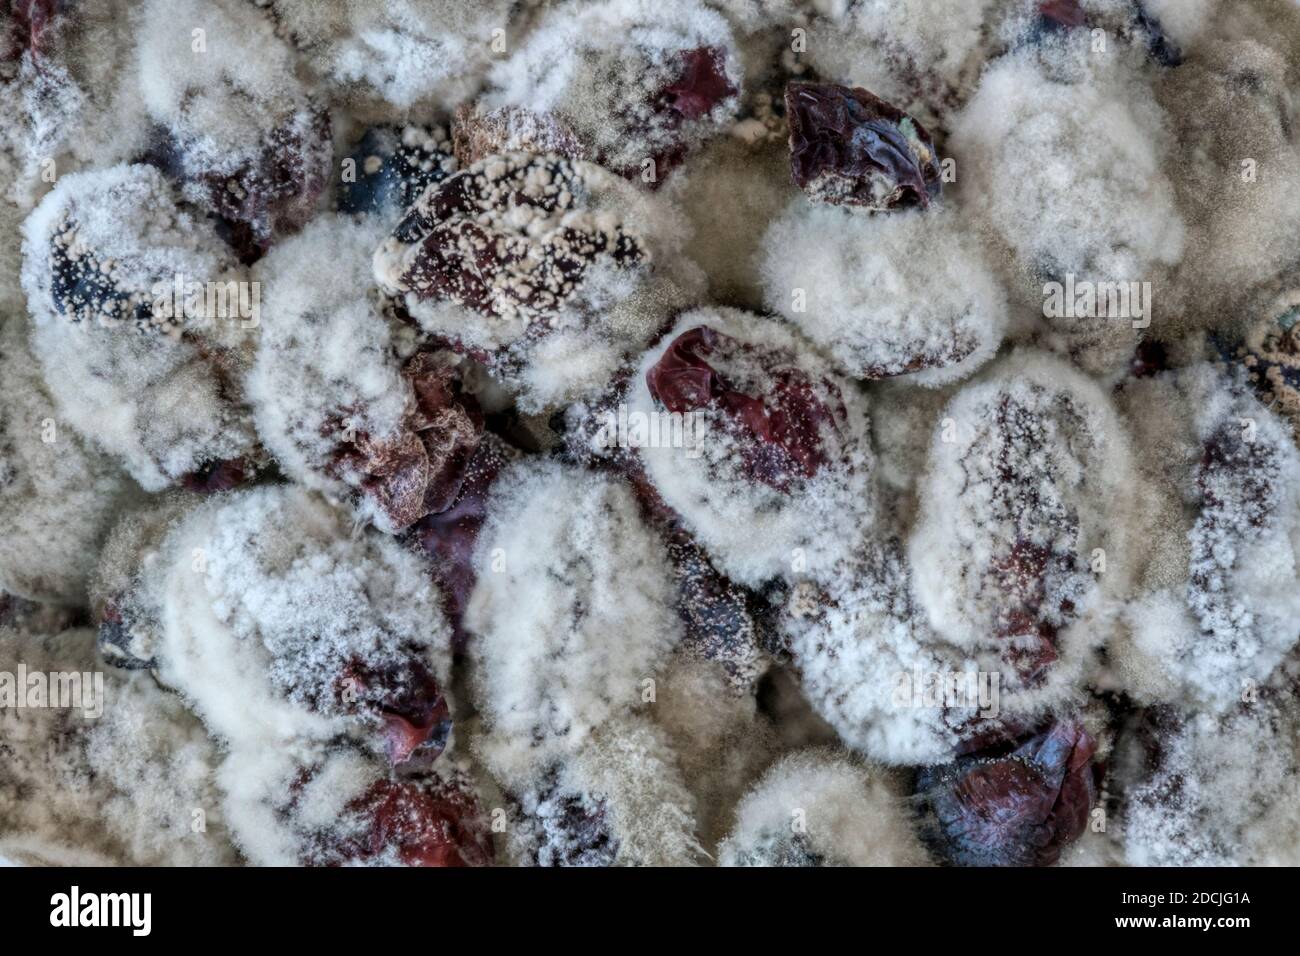 Close up of a bowl of plums that have rotted and are covered with white mould. Stock Photo